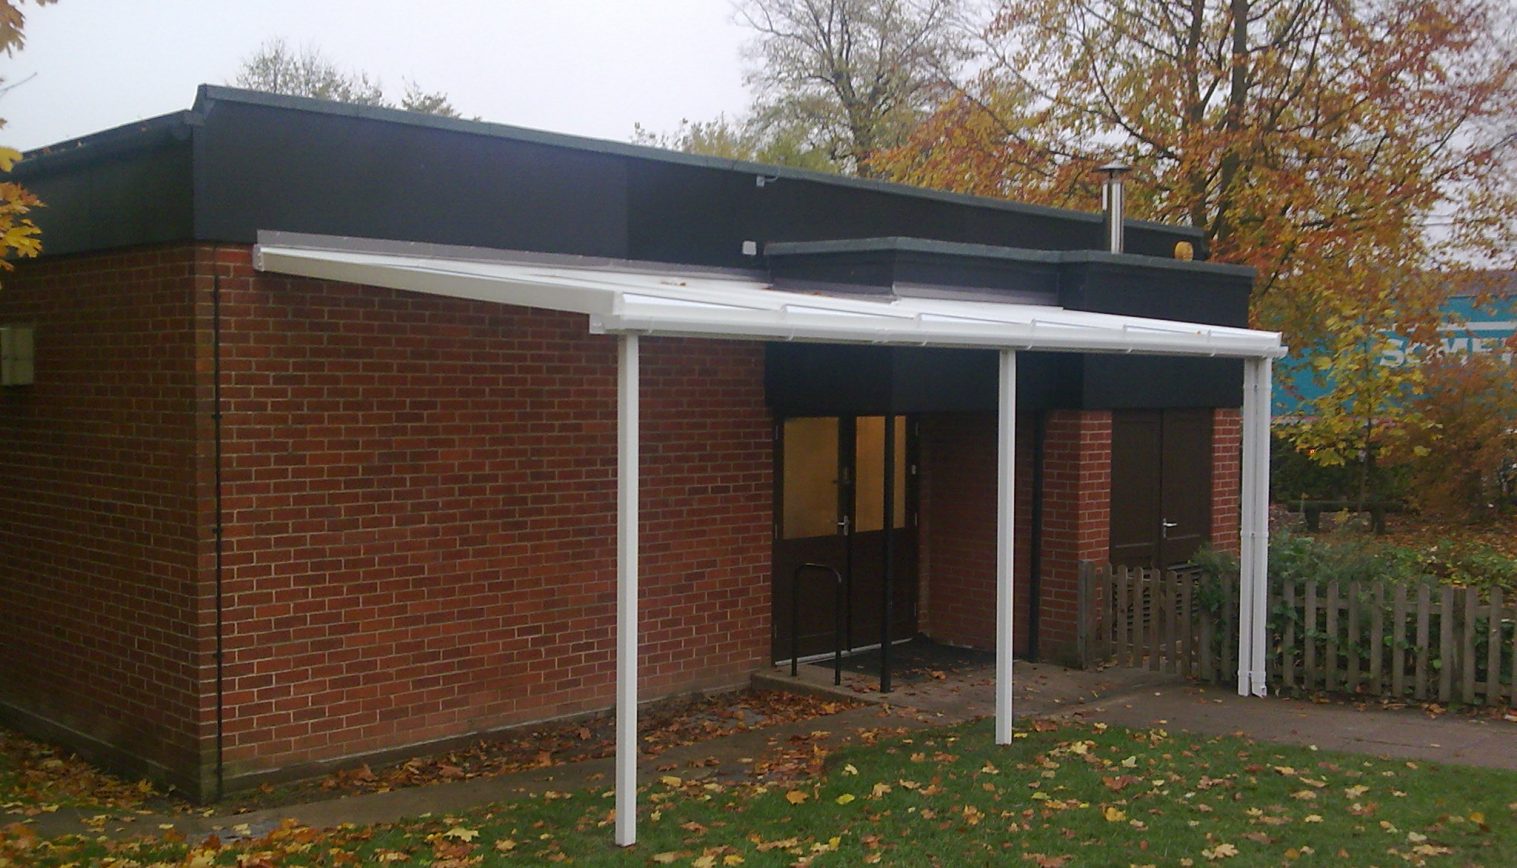 Recreation Road Infant School – Wall Mounted Canopy